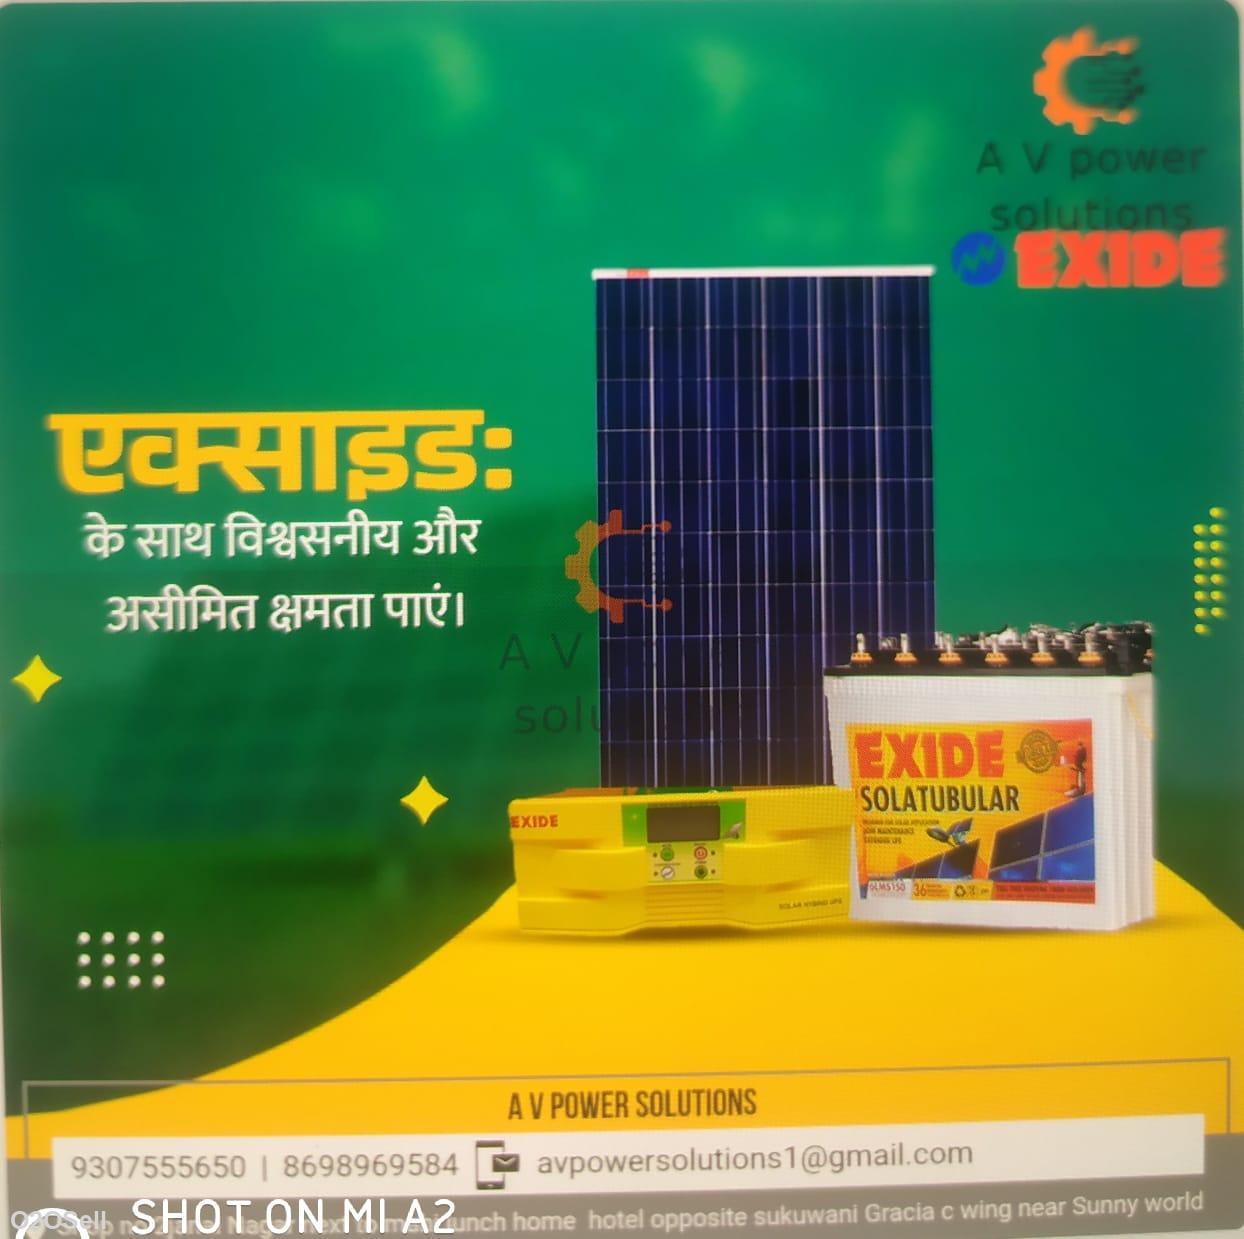 A V power solutions - Cover Image